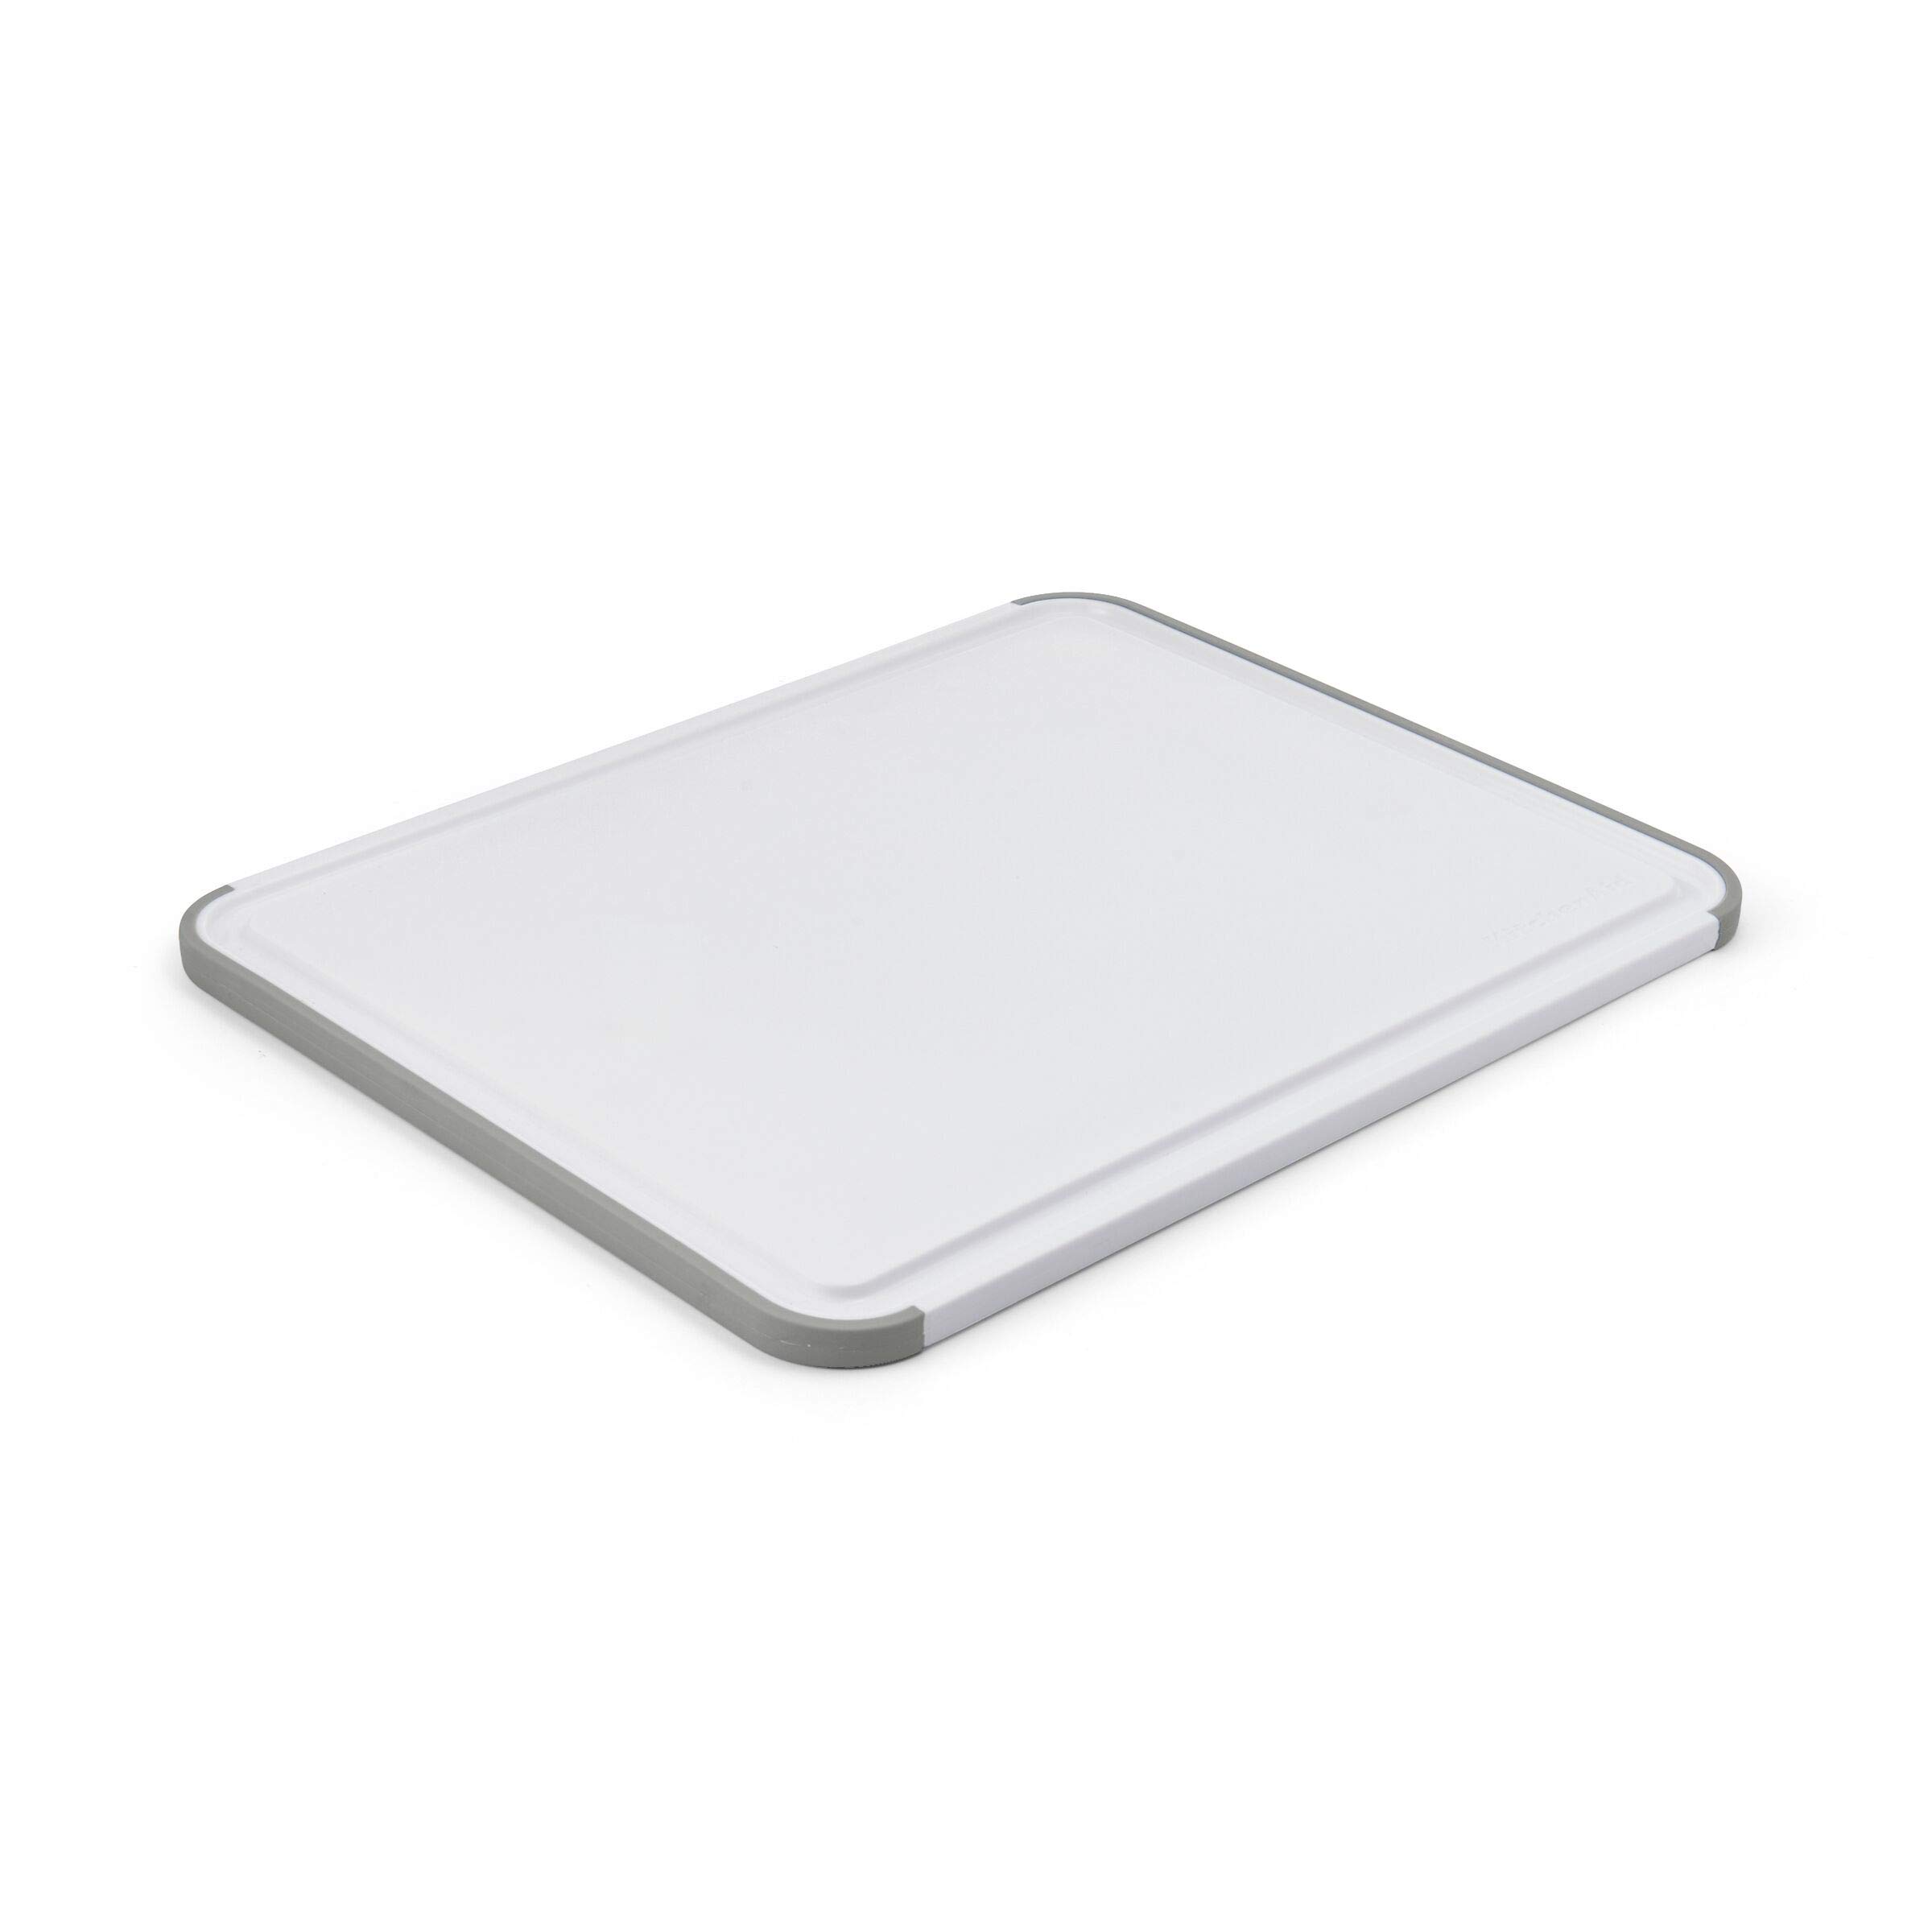 KitchenAid Classic Plastic Cutting Board with Perimeter Trench and Non Slip Edges, Dishwasher Safe, 11 inch x 14 inch, White and Gray $9.49